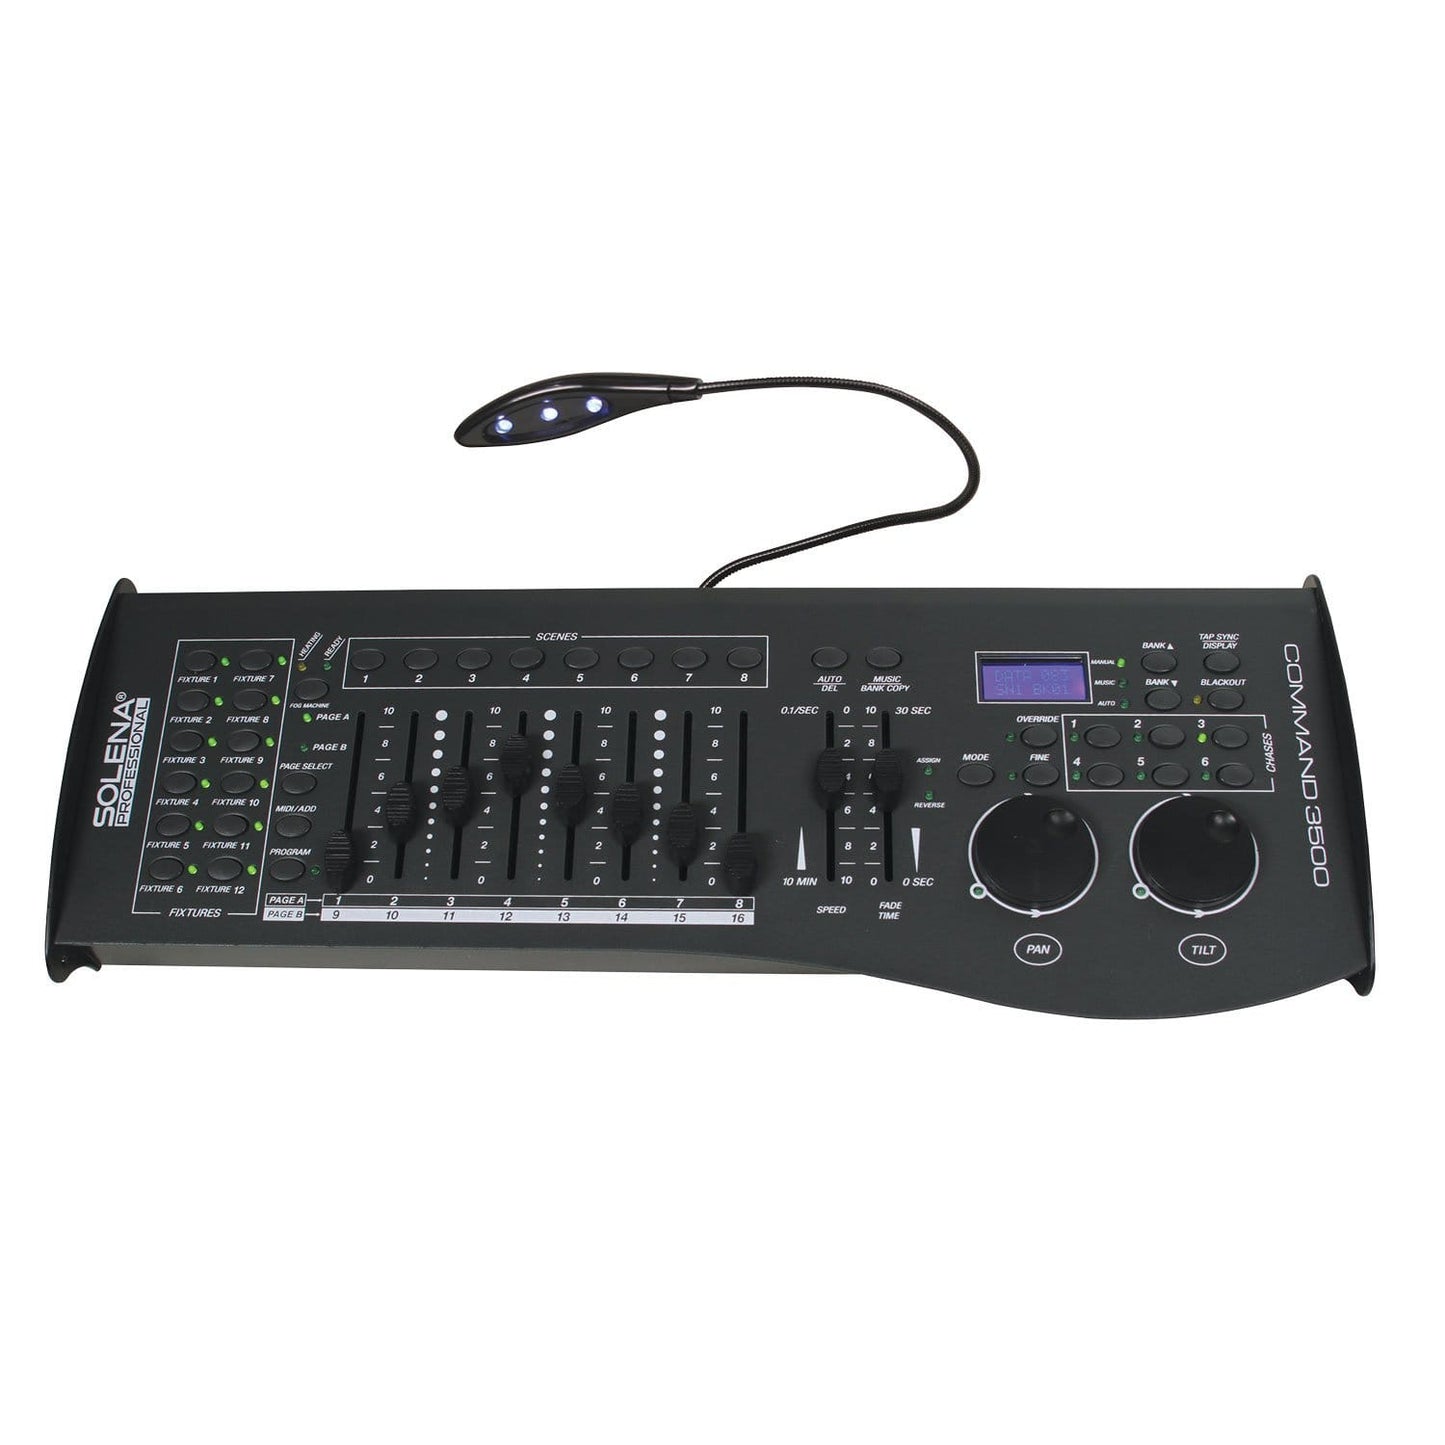 ADJ American DJ Inno Spot Pro 4-Pack with DMX Controller and Accessories - PSSL ProSound and Stage Lighting